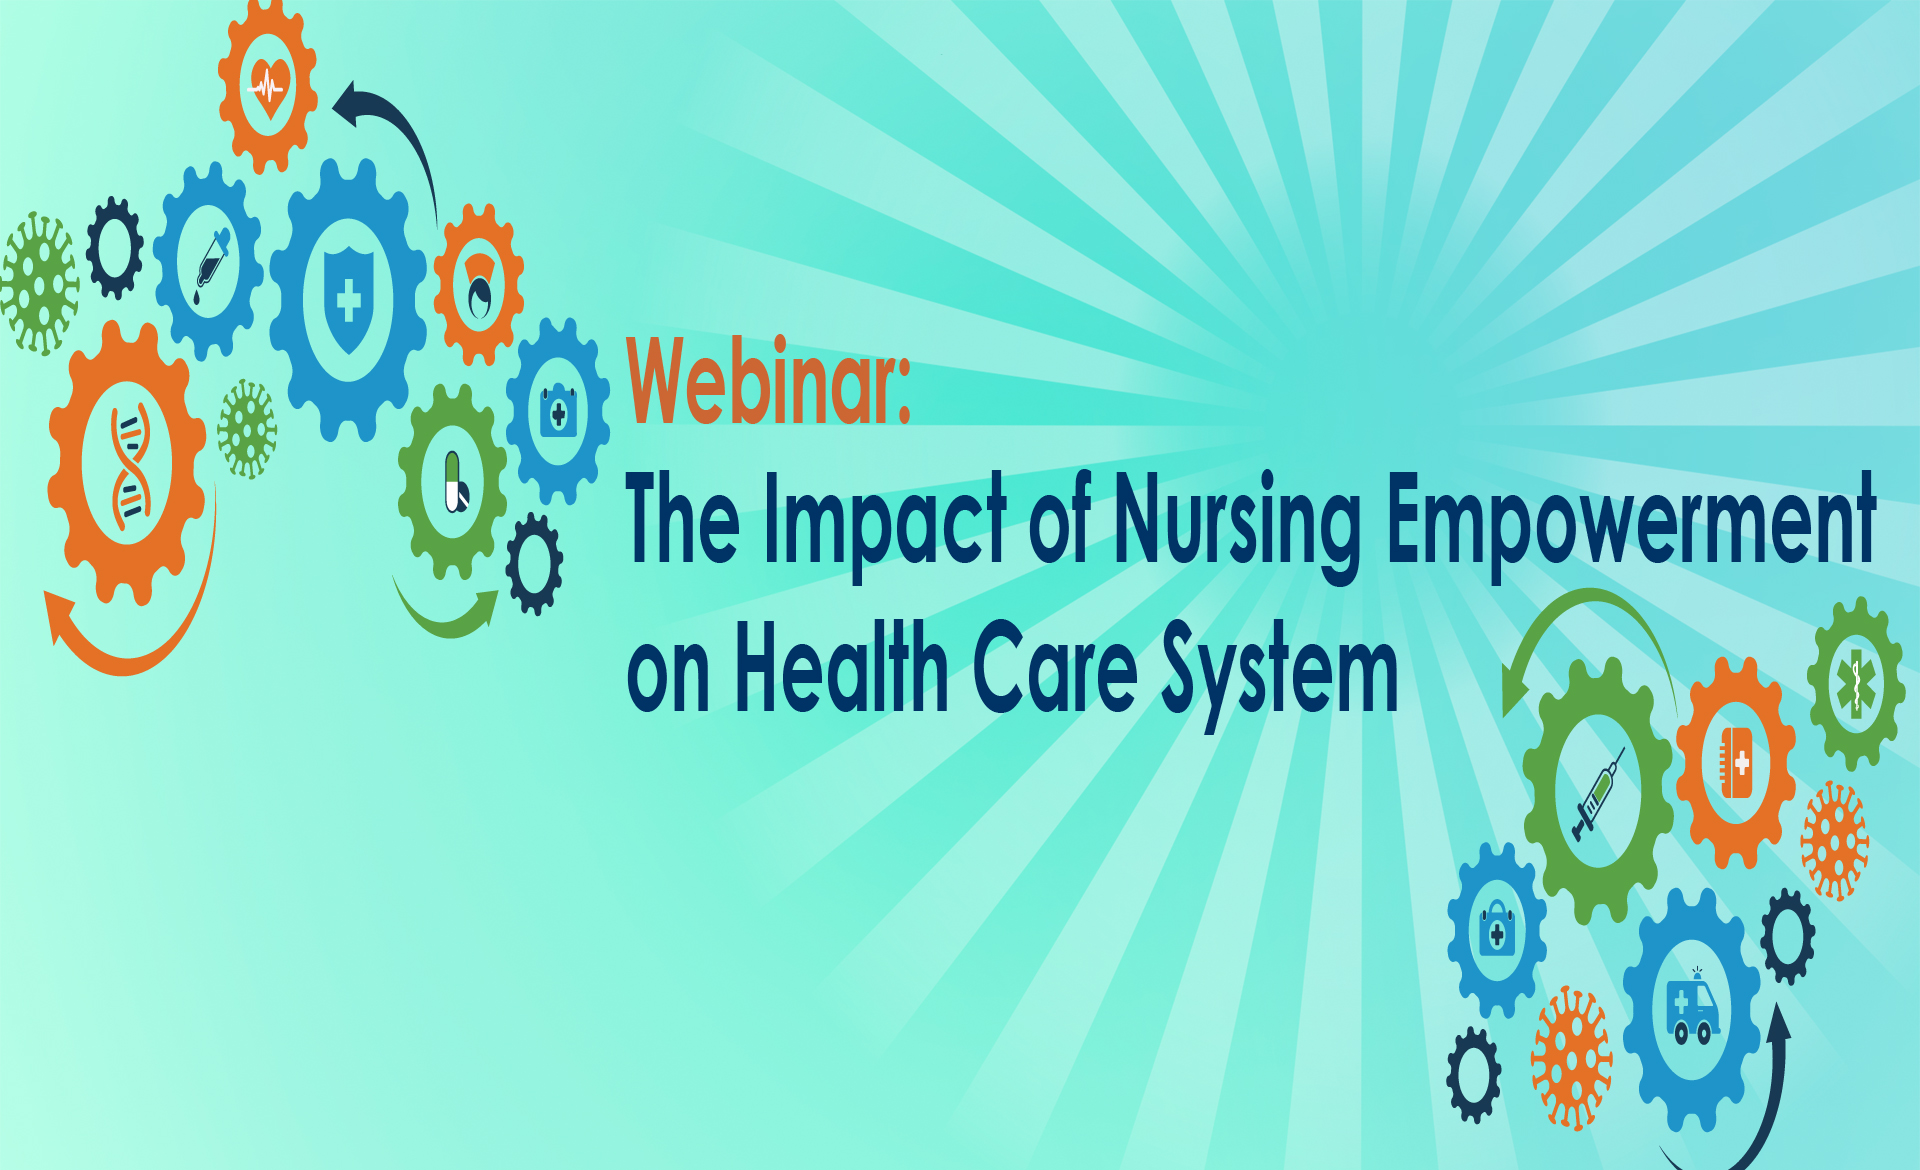 TaiwanICDF Cooperating with Taiwan Nurses Association and CARE to Conduct Webinar on Impact of Nursing Empowerment on Health Care System